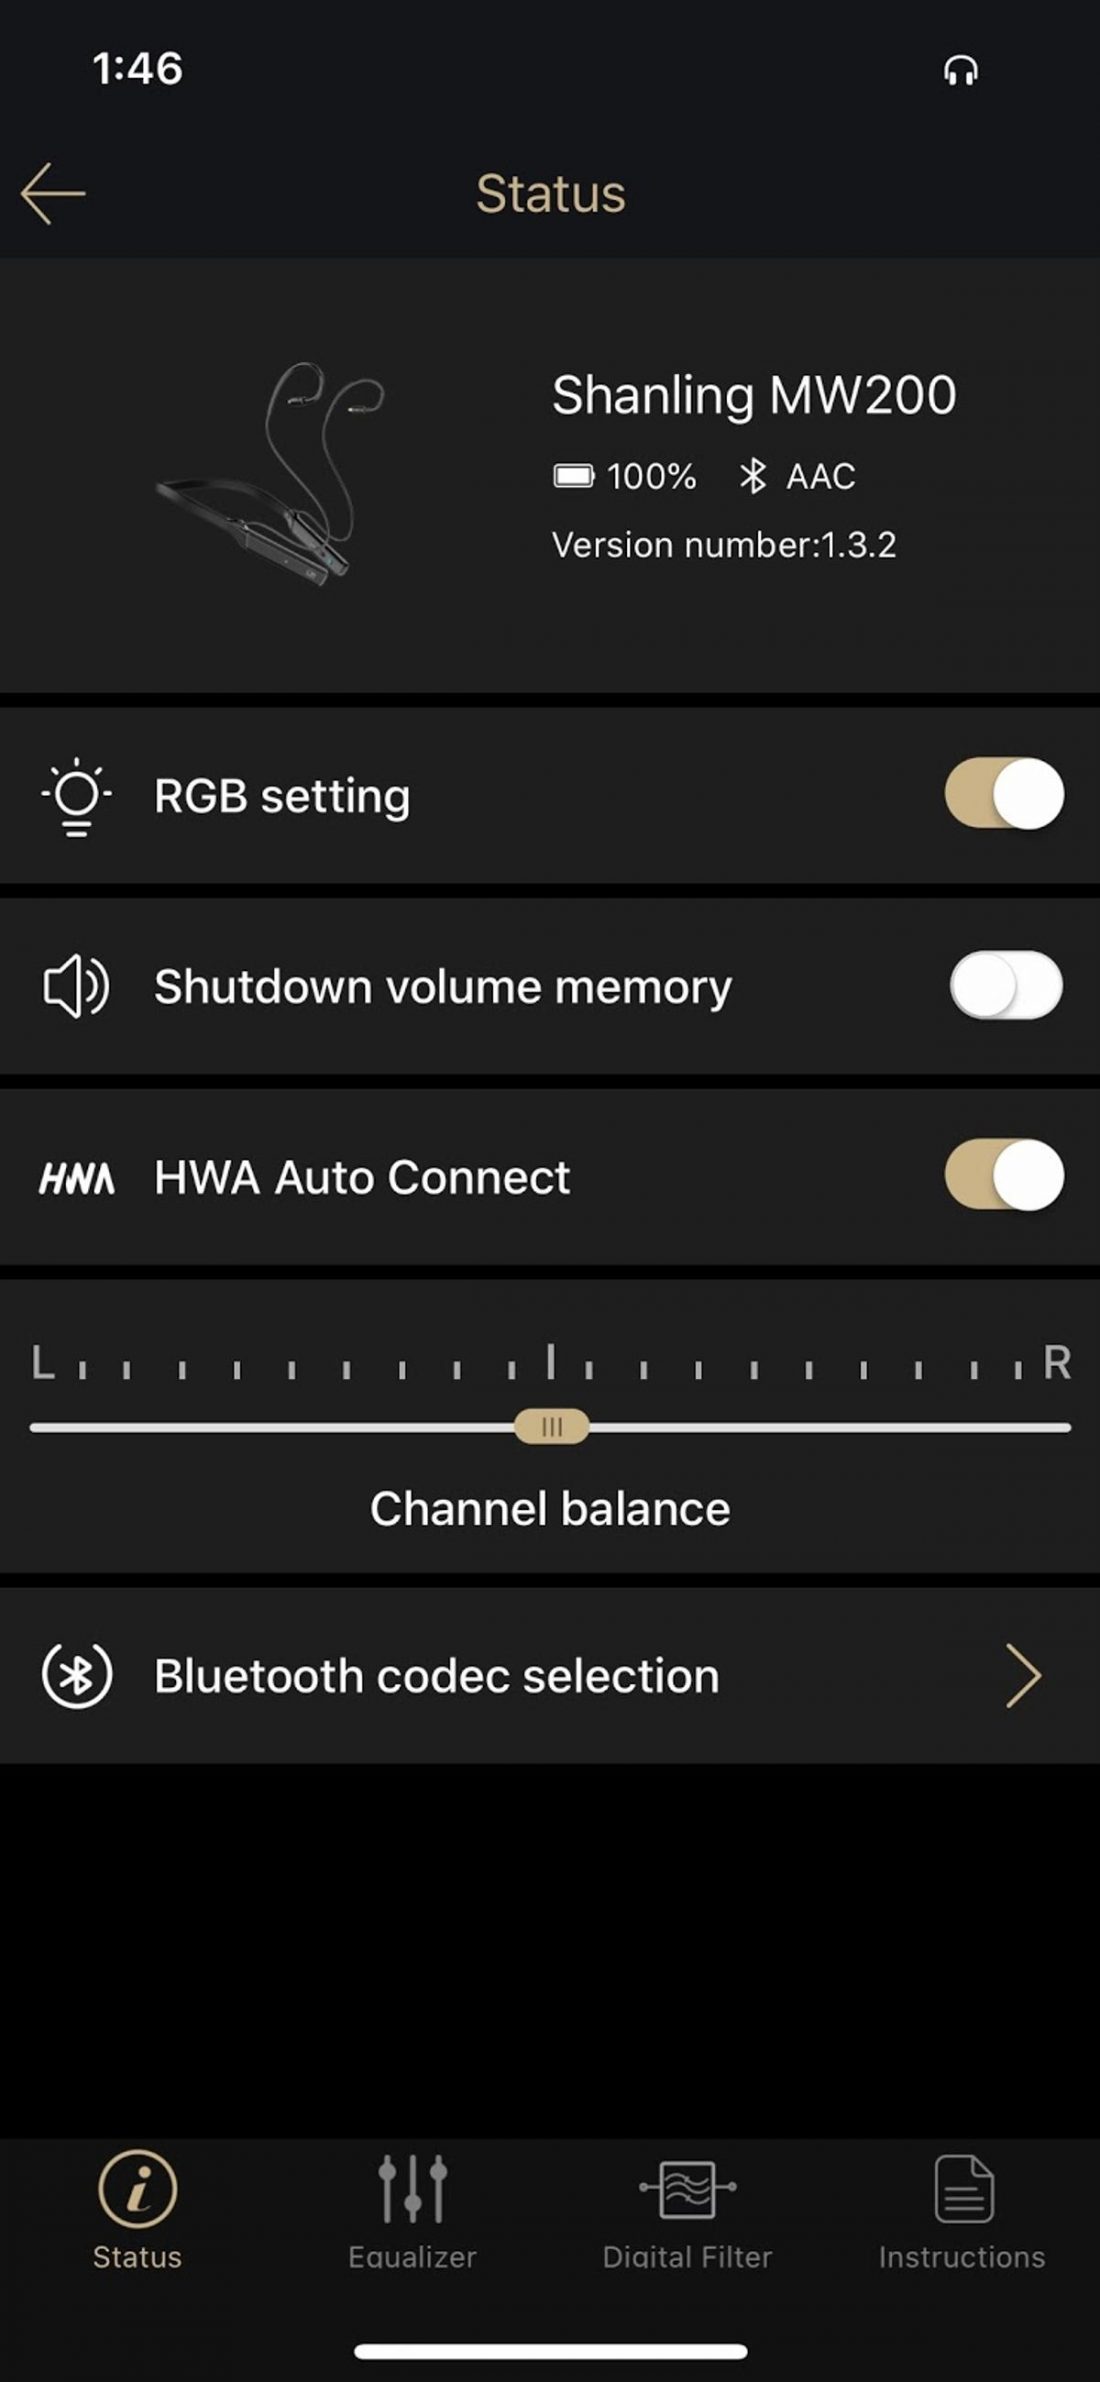 The main screen of the Shanling companion app on iOS. Note that the firmware version 1.32 is current as of writing and that it is using the AAC codec to communicate with my iPhone.